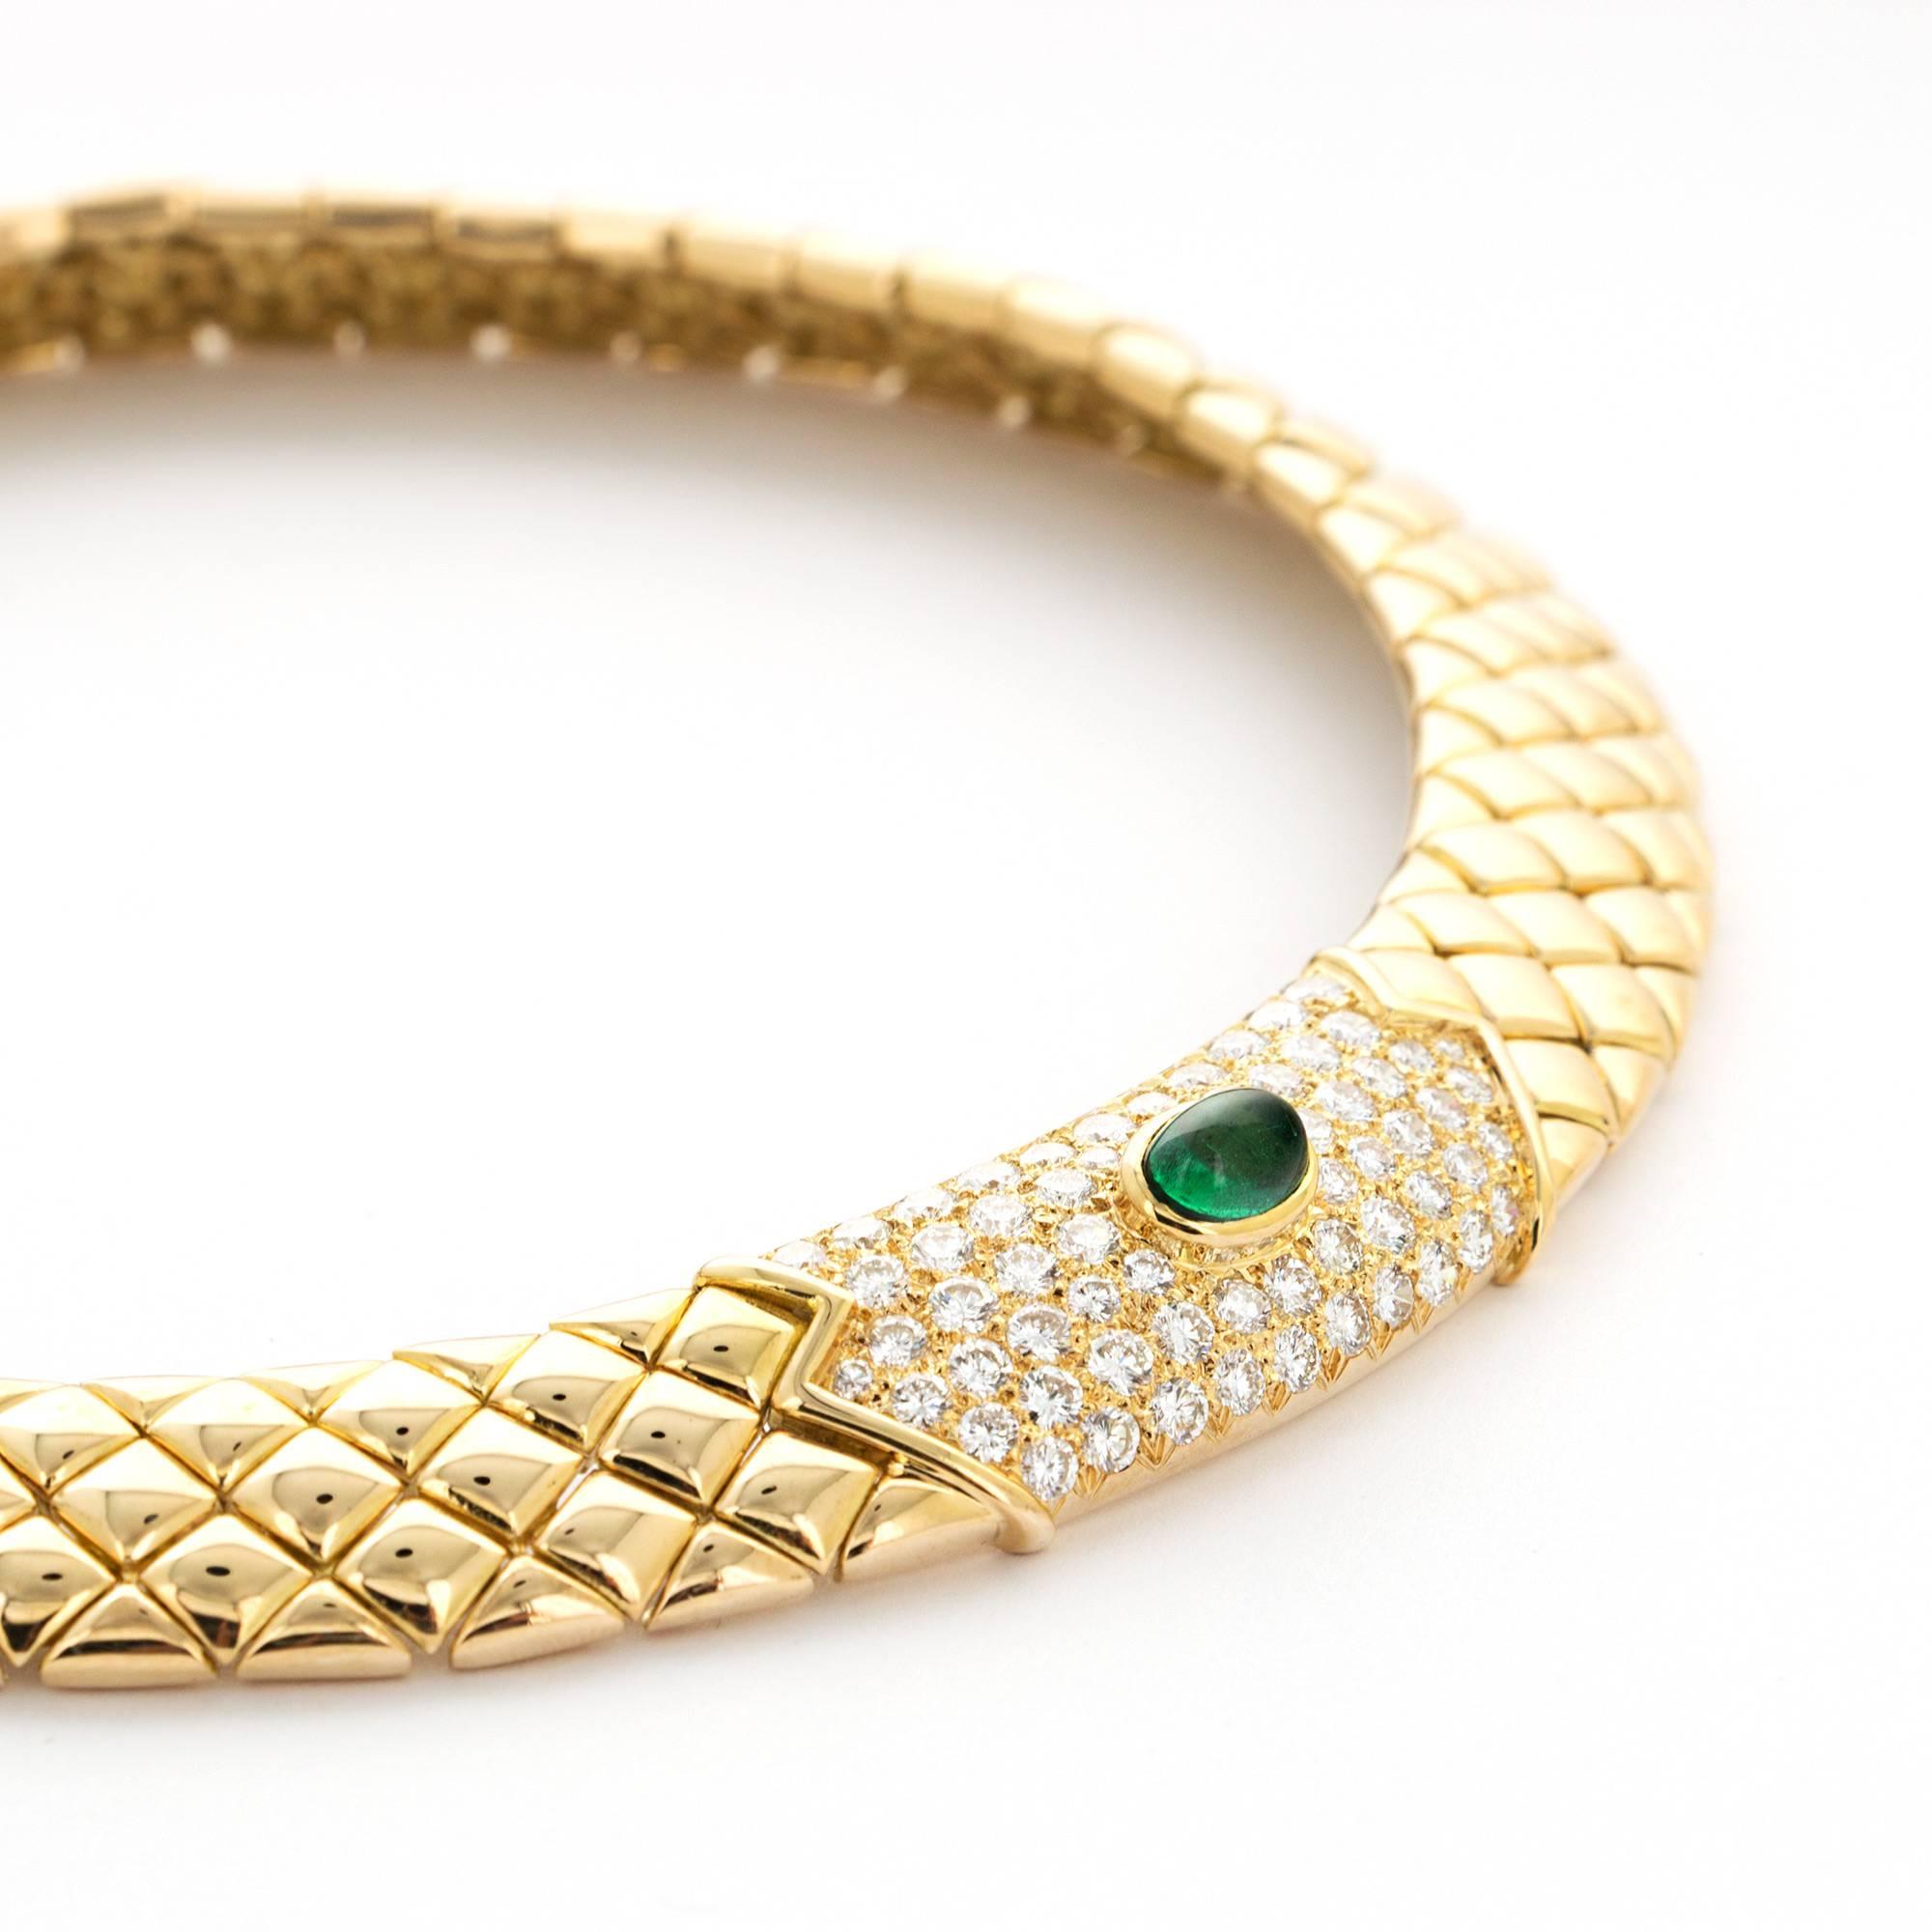 An 18k Yellow Gold Choker Necklace with Pave Diamonds and Cabochon Emerald by Van Cleef & Arpels. Very Finely Made Piece by One of the Best Jewelers in the World. Made in France.